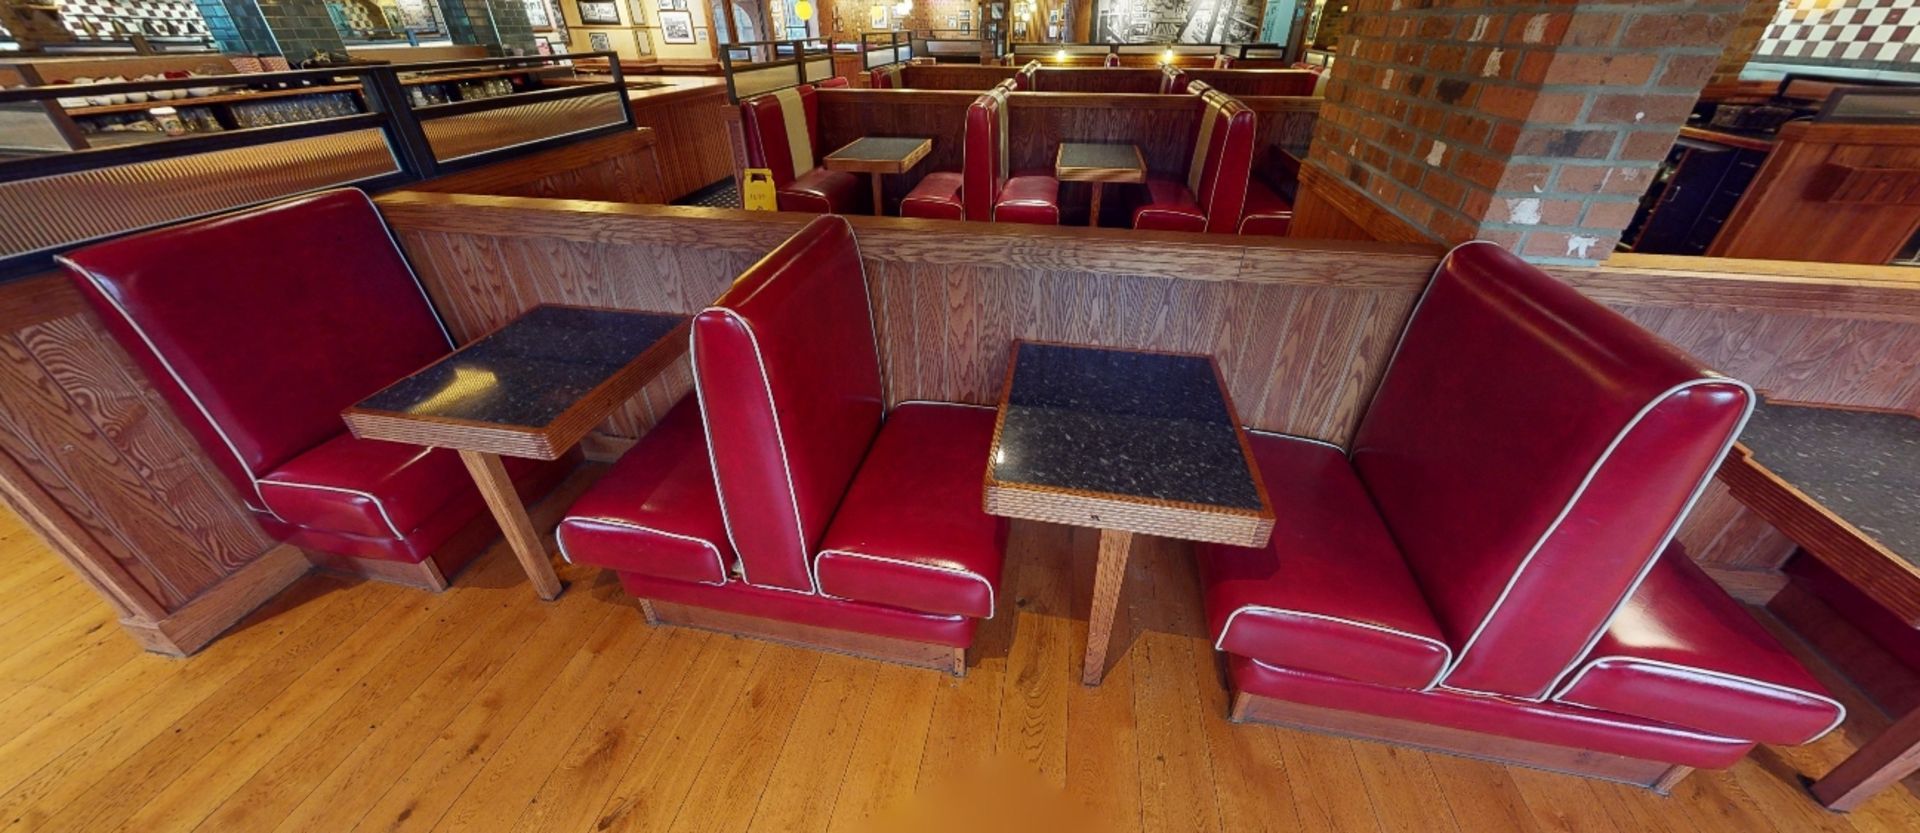 Selection of Single Seating Benches and Dining Tables to Seat Upto 10 Persons - Retro - 1950's - Image 6 of 6